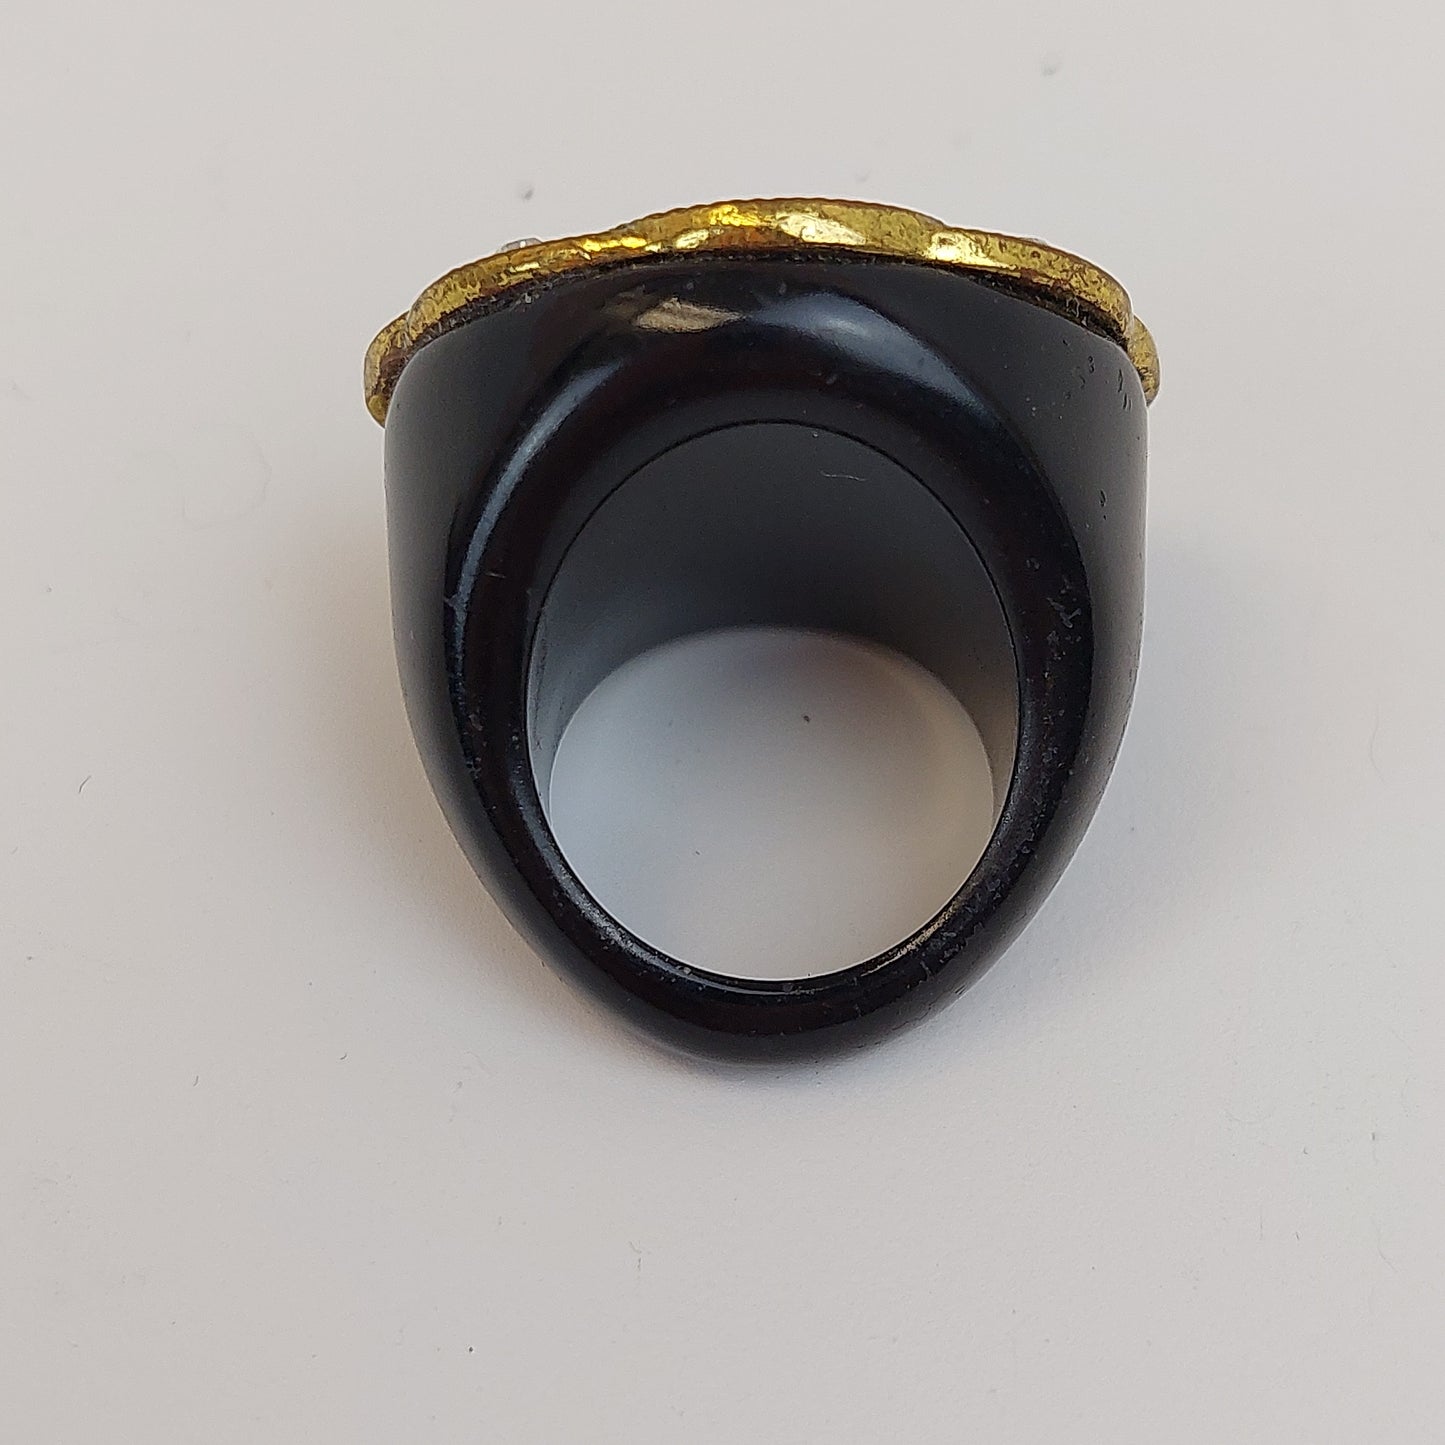 Black Lucite Resin Ring with Gold Design and Rhinestones Size 7